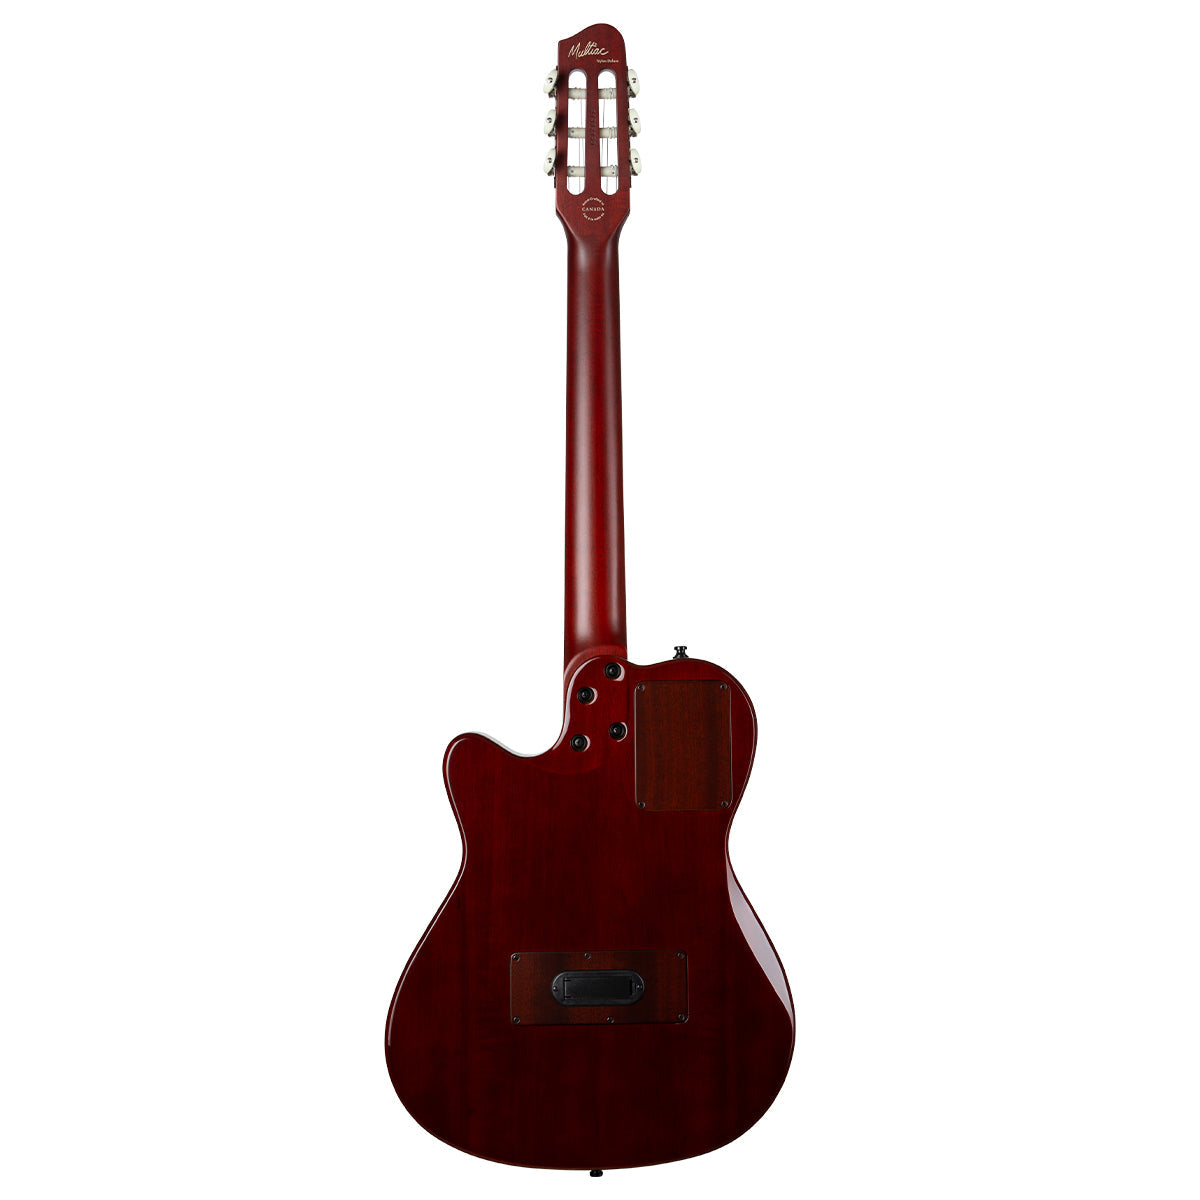 Godin Multiac Nylon Deluxe Guitar ~ Natural, Electric Guitar for sale at Richards Guitars.